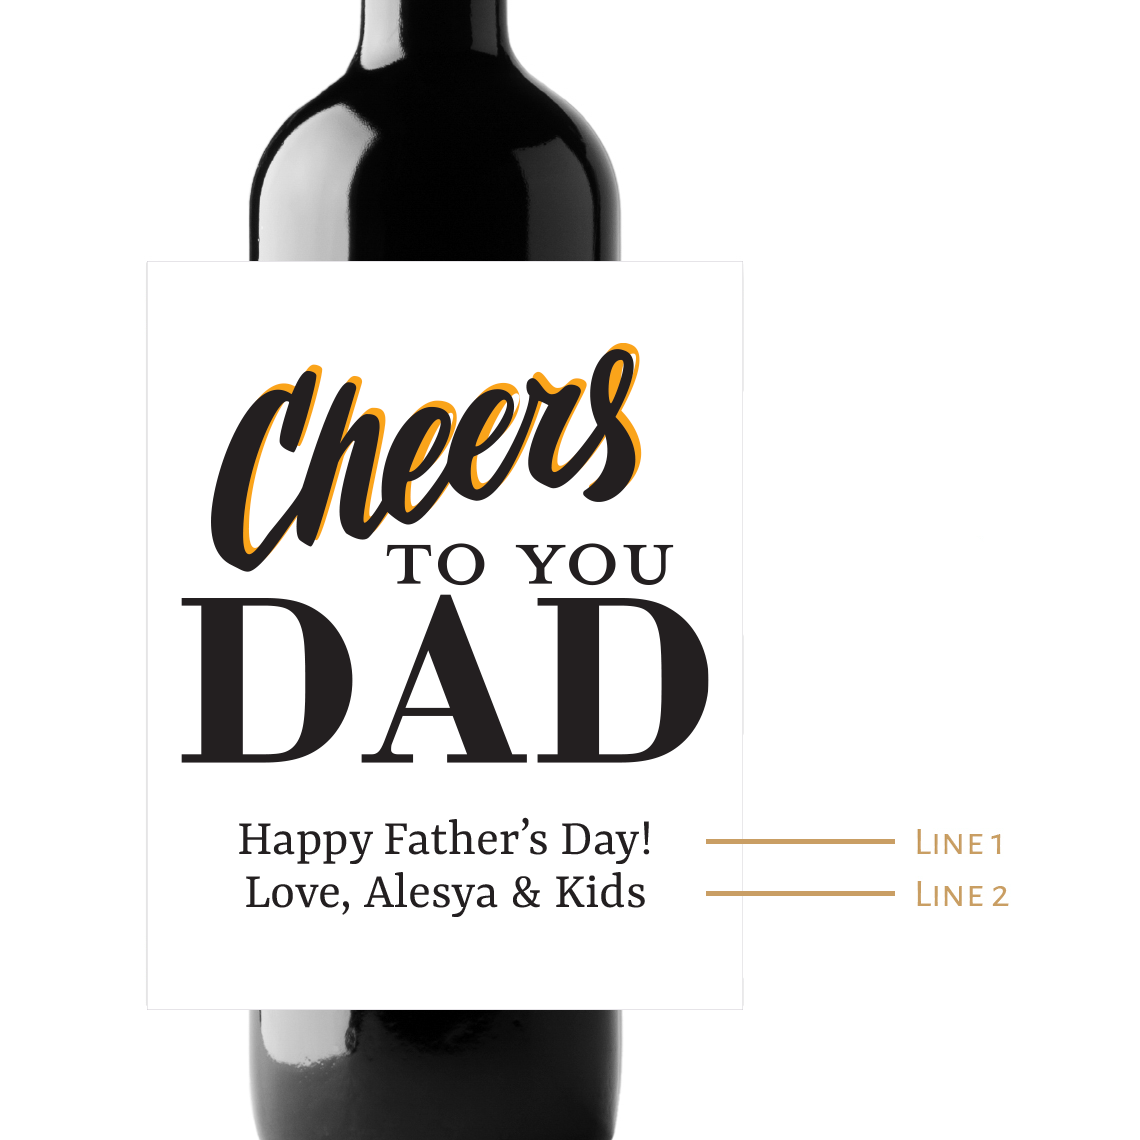 Cheers To You Dad Custom Personalized Wine Champagne Labels (set of 3)